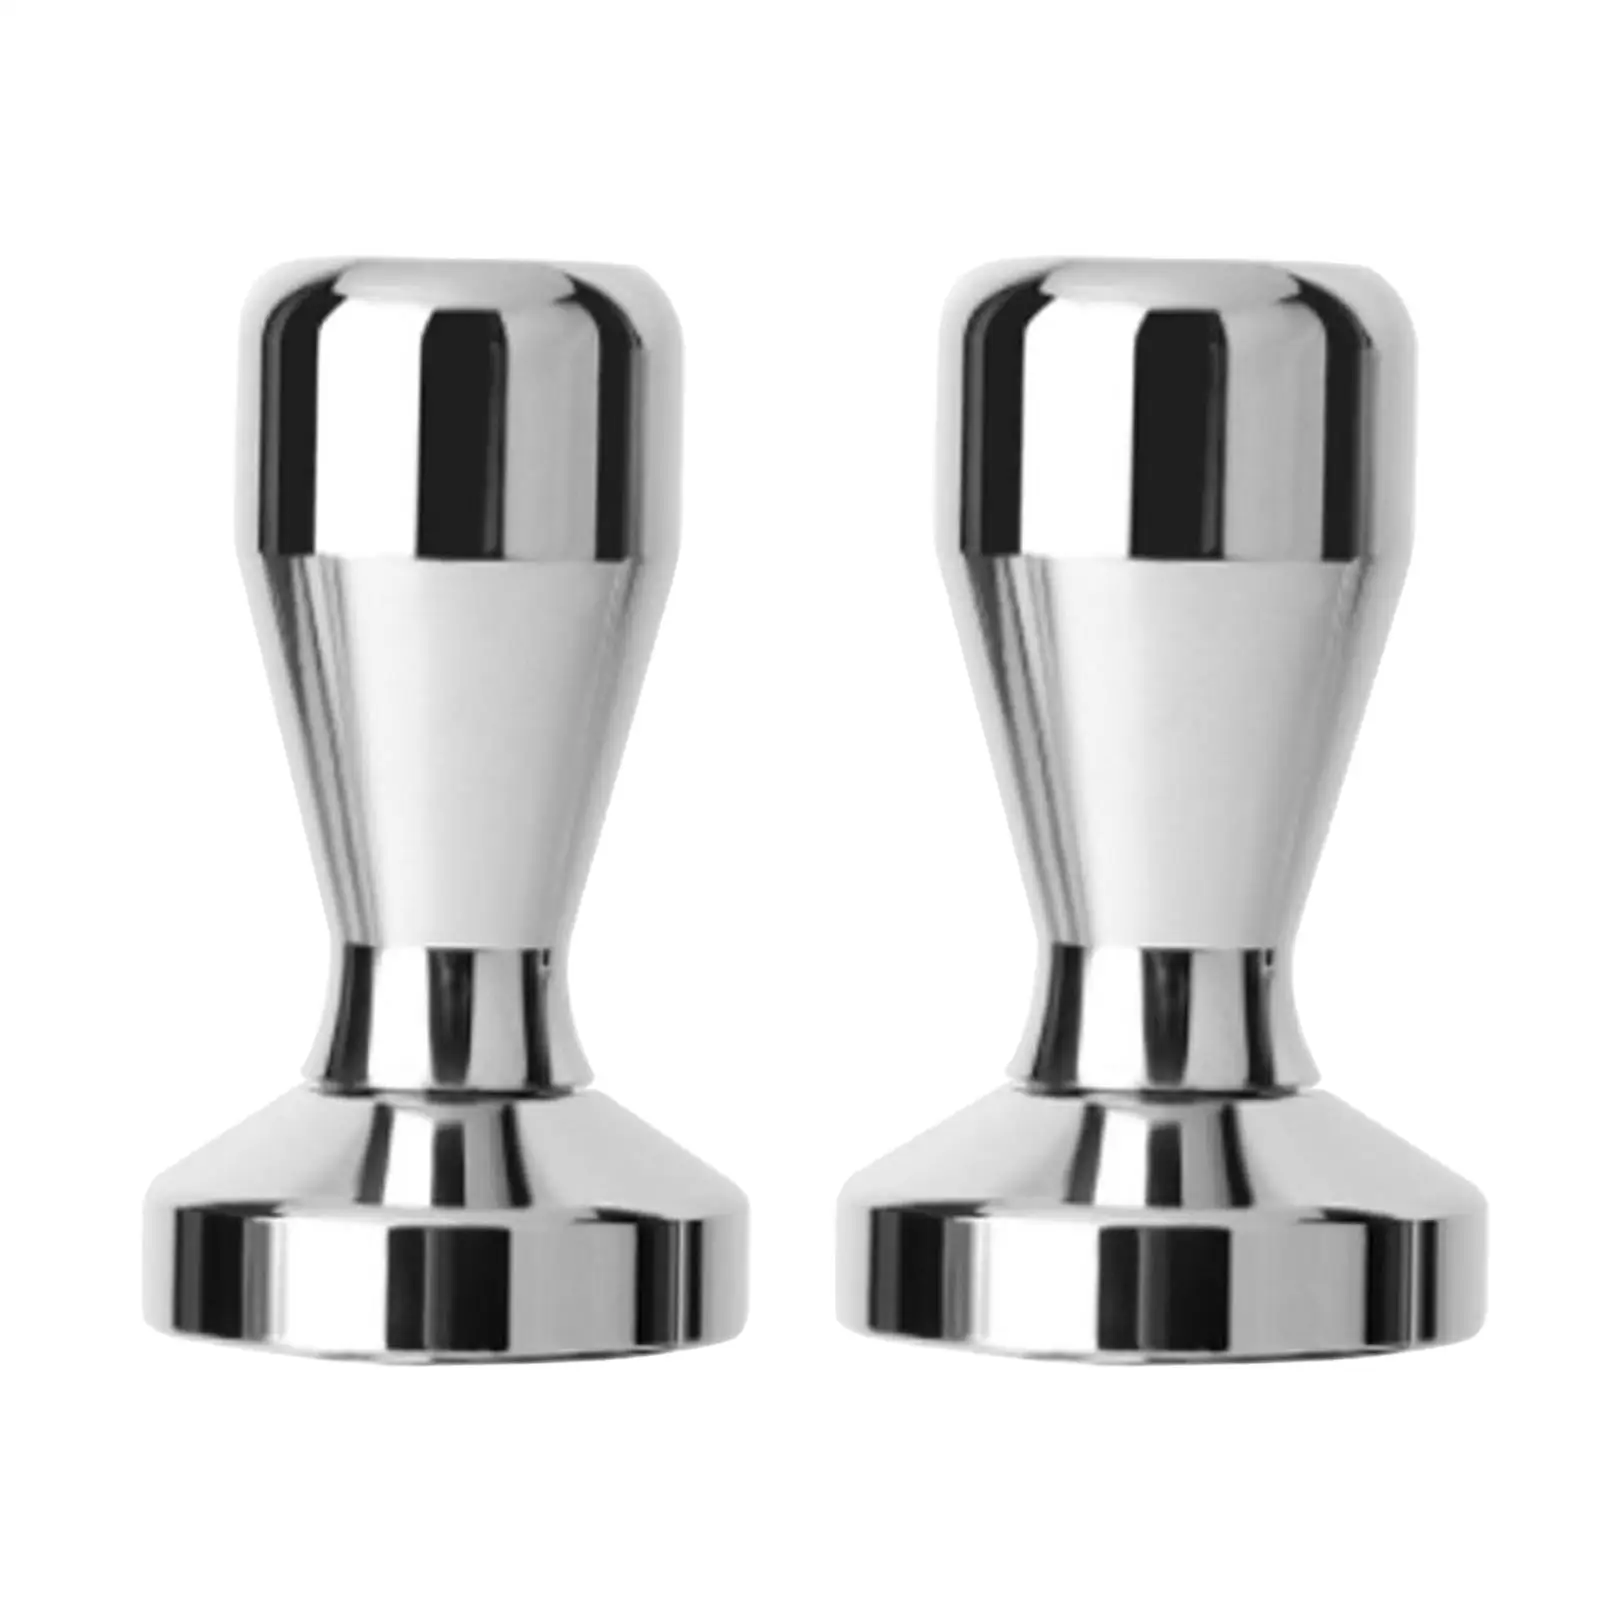 Stainless Steel Coffee Tamper Espresso Machine Accessory for